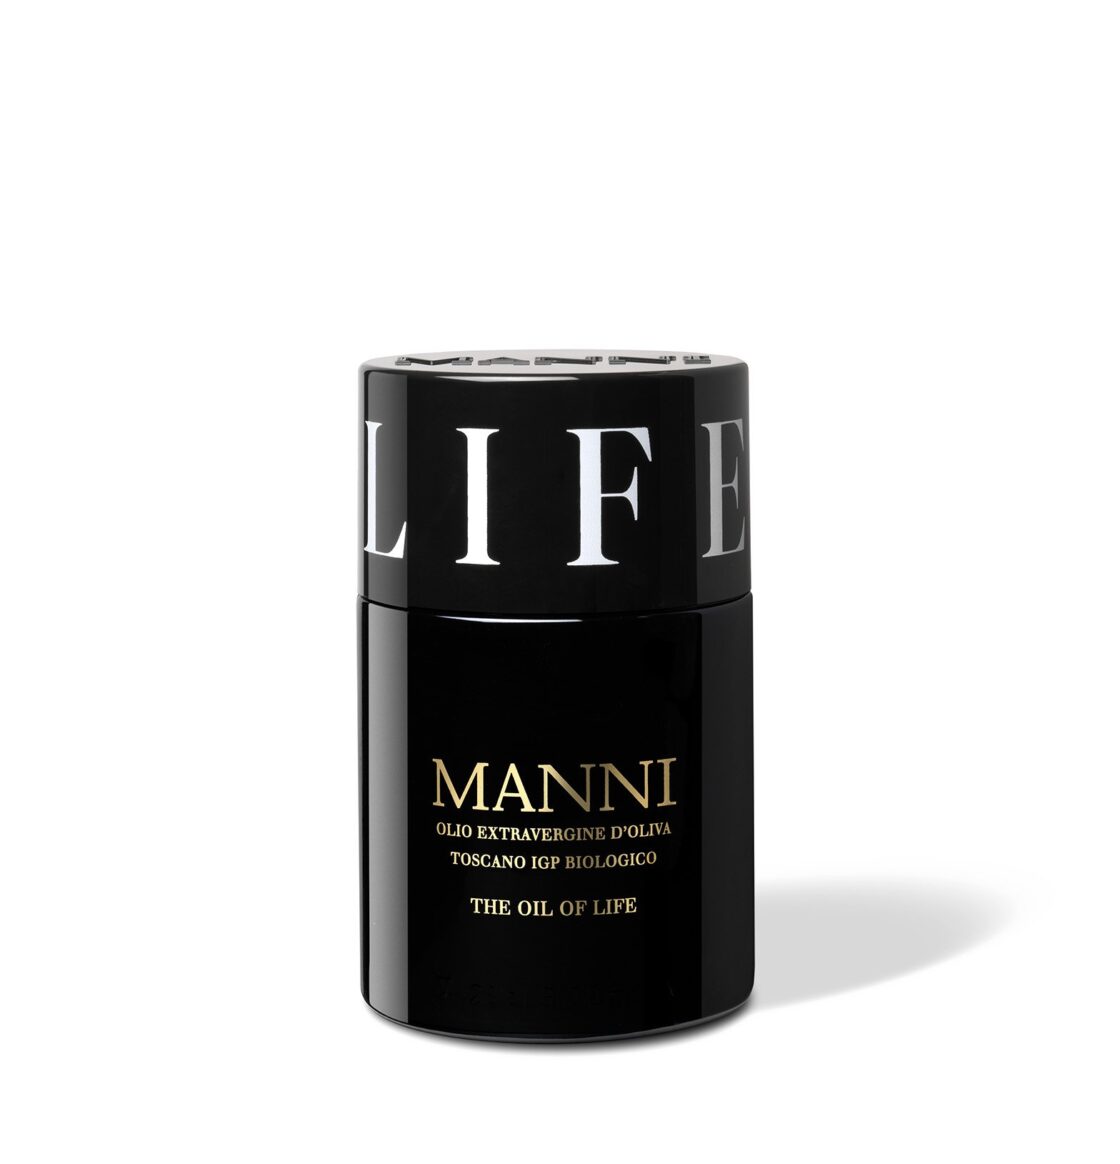 Manni Tuscan Oil of Life Olive Oil